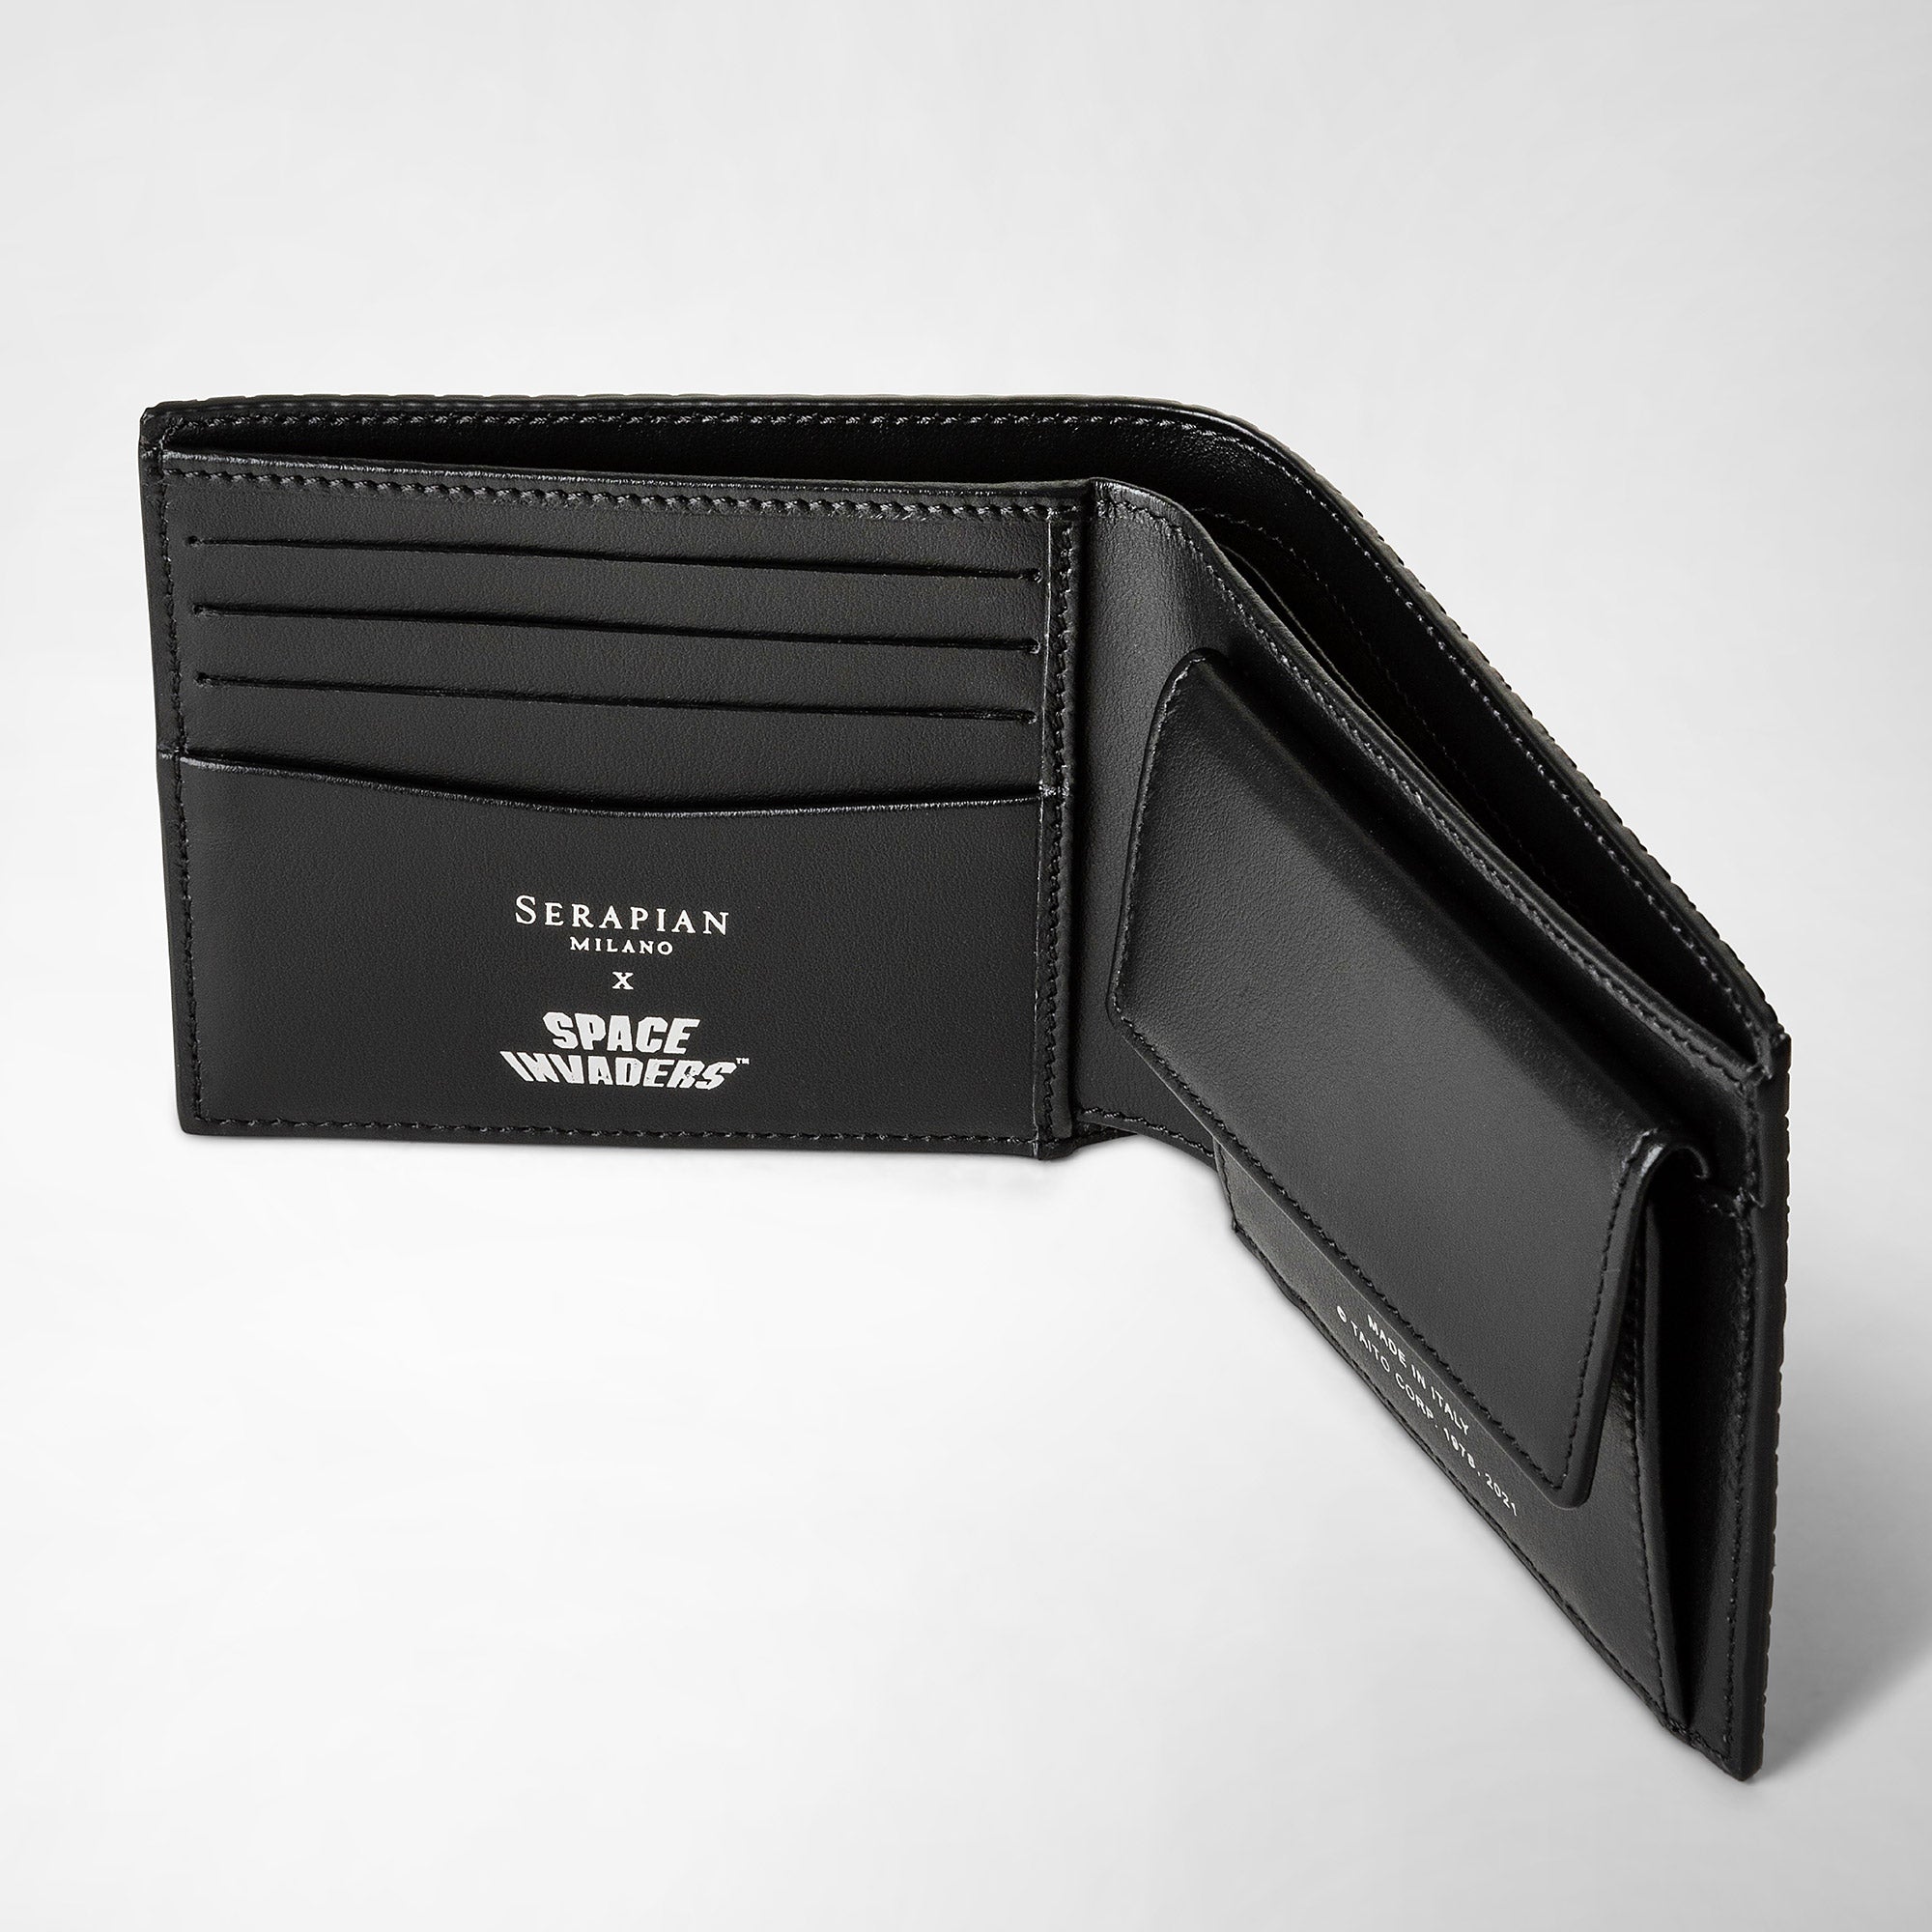 4-CARD BILLFOLD WALLET WITH COIN POUCH IN STEPAN